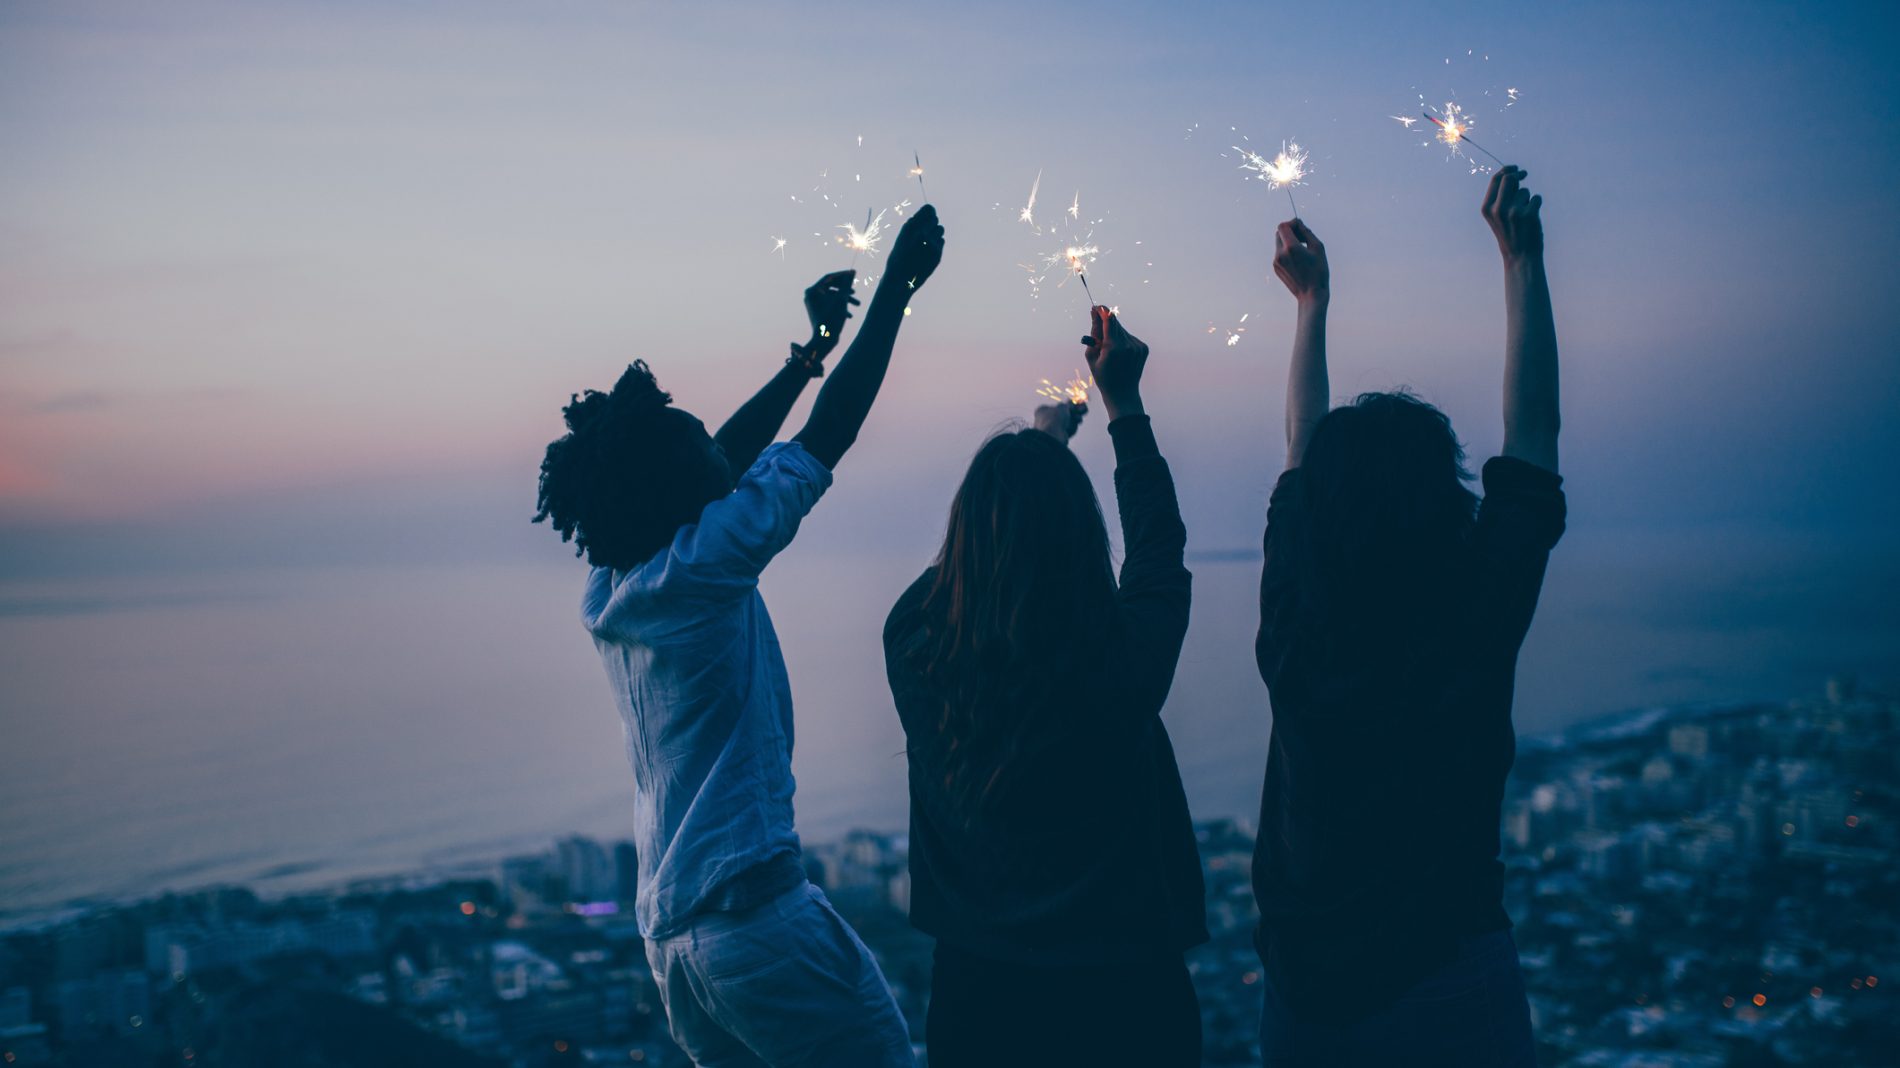 Group of young adult friends celebrate with sparklers at night